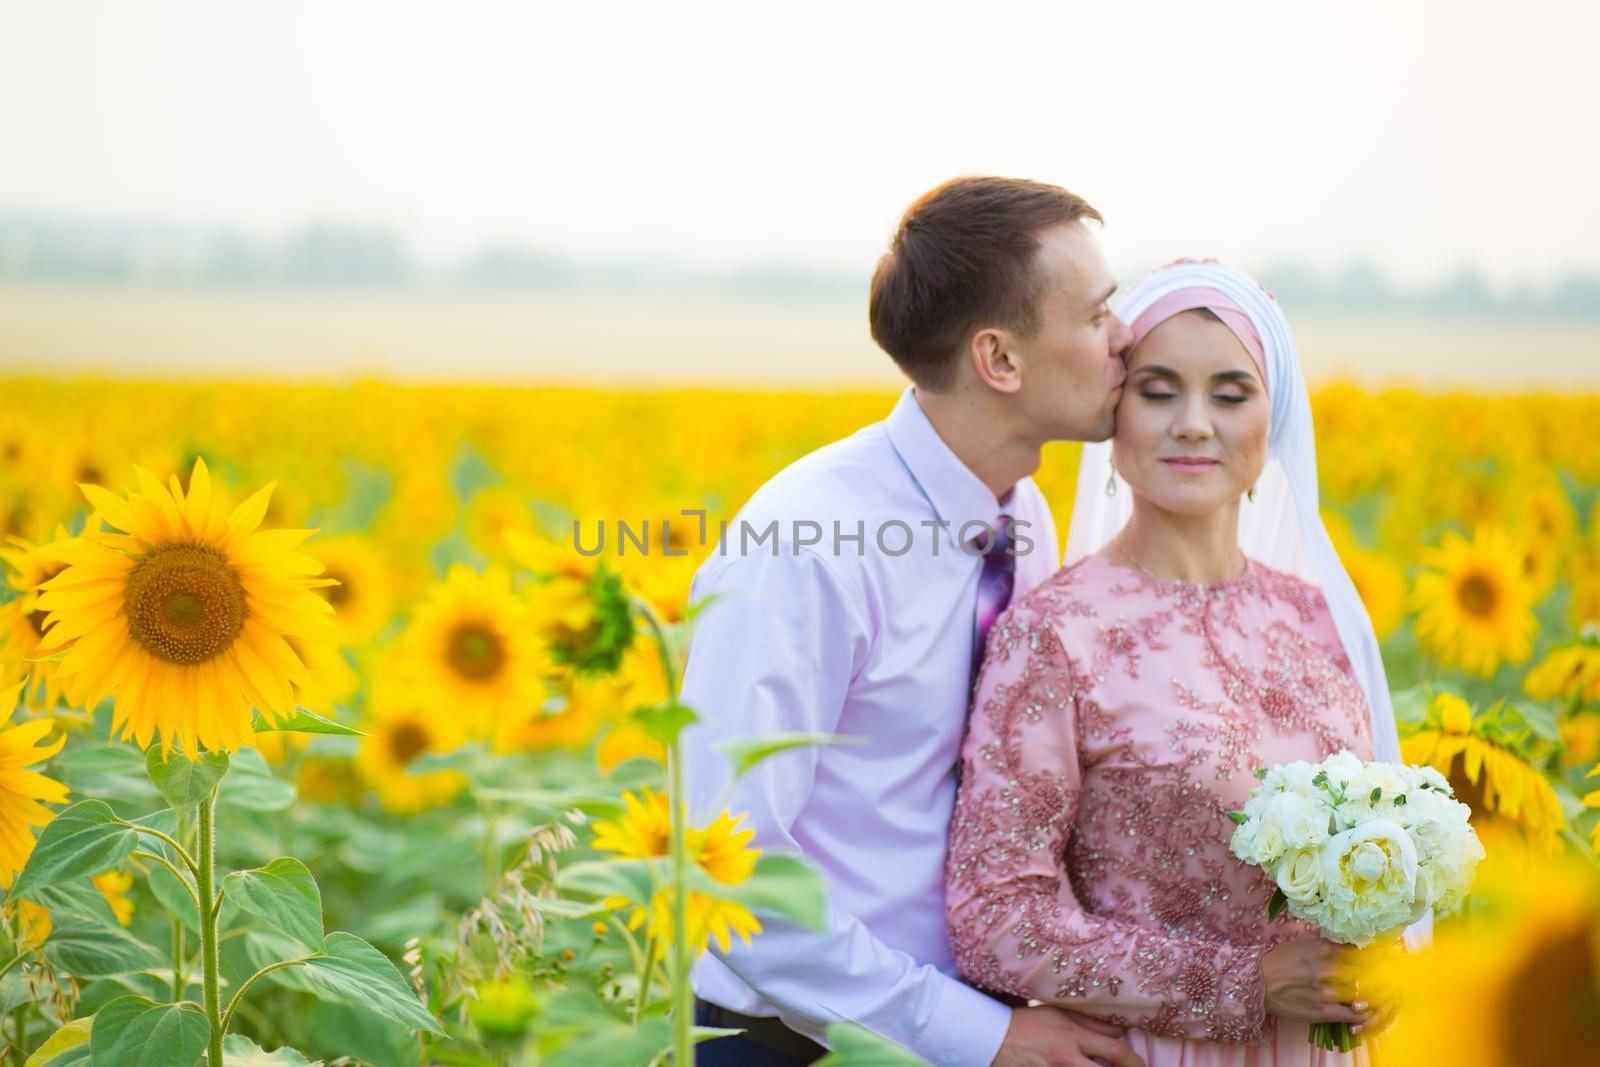 Smiling young islamic couple portrait on sunflowers field. Muslim marriage.